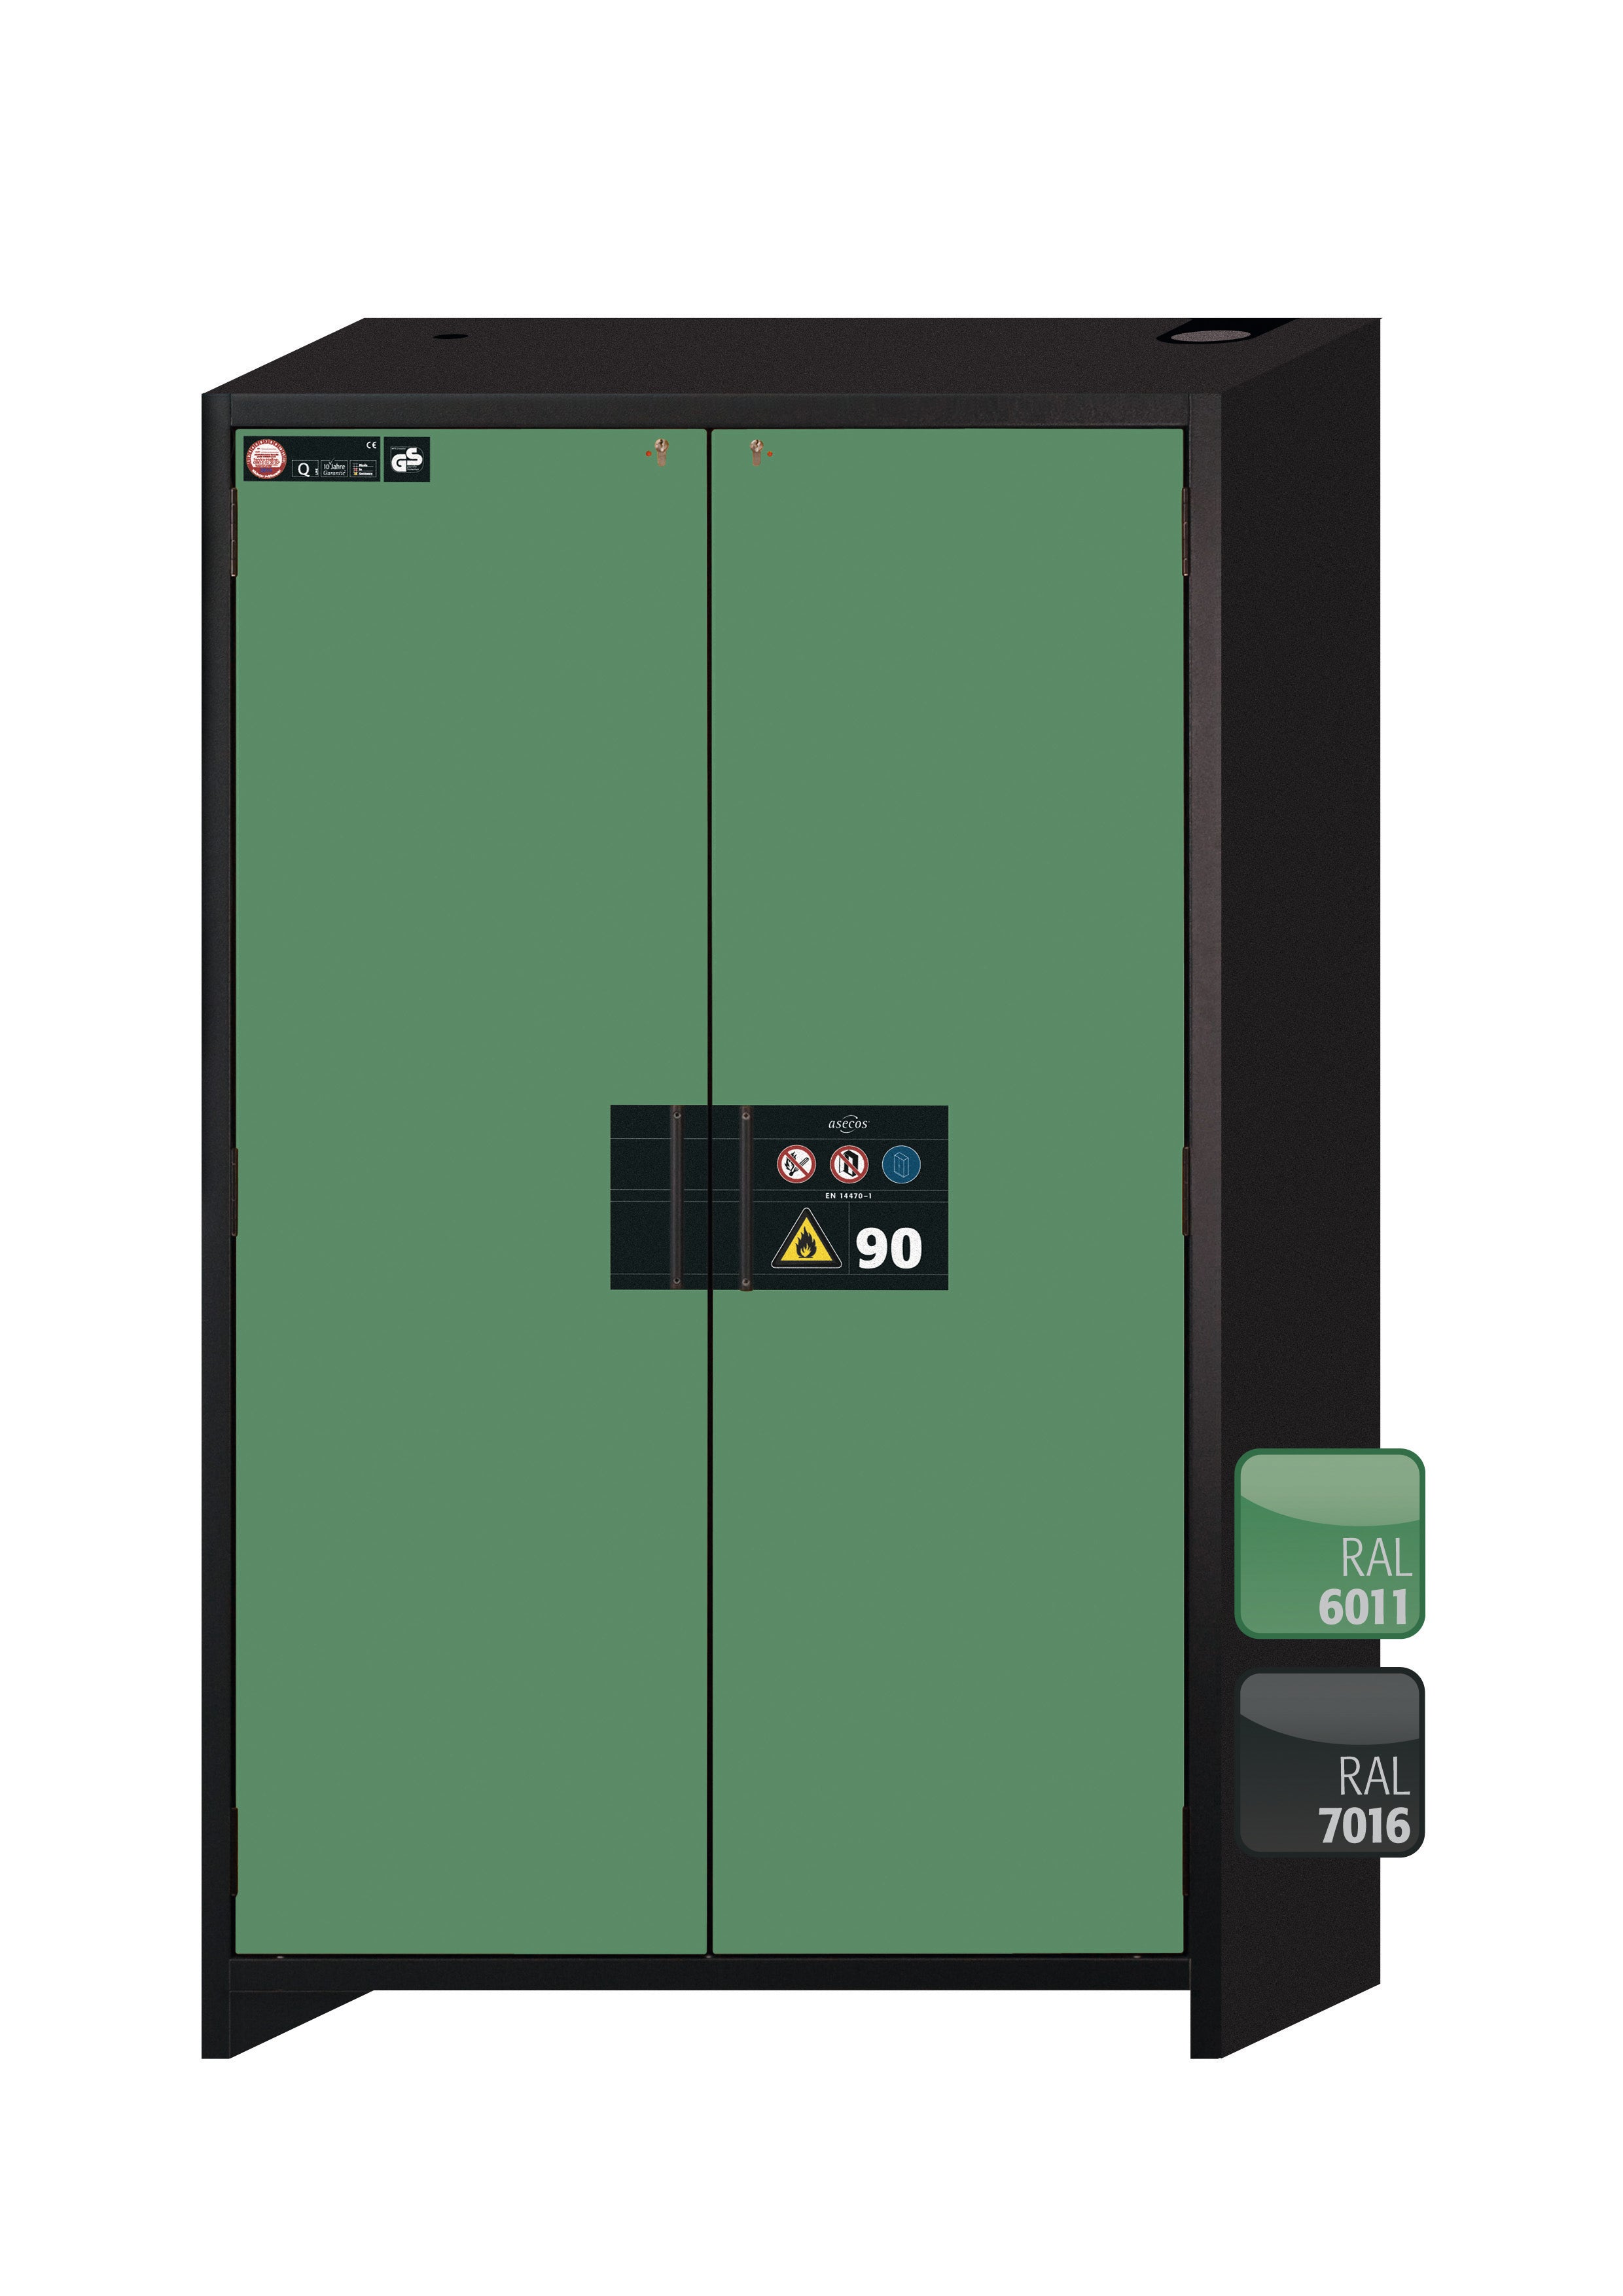 Type 90 safety storage cabinet Q-CLASSIC-90 model Q90.195.120 in reseda green RAL 6011 with 2x shelf standard (stainless steel 1.4301),